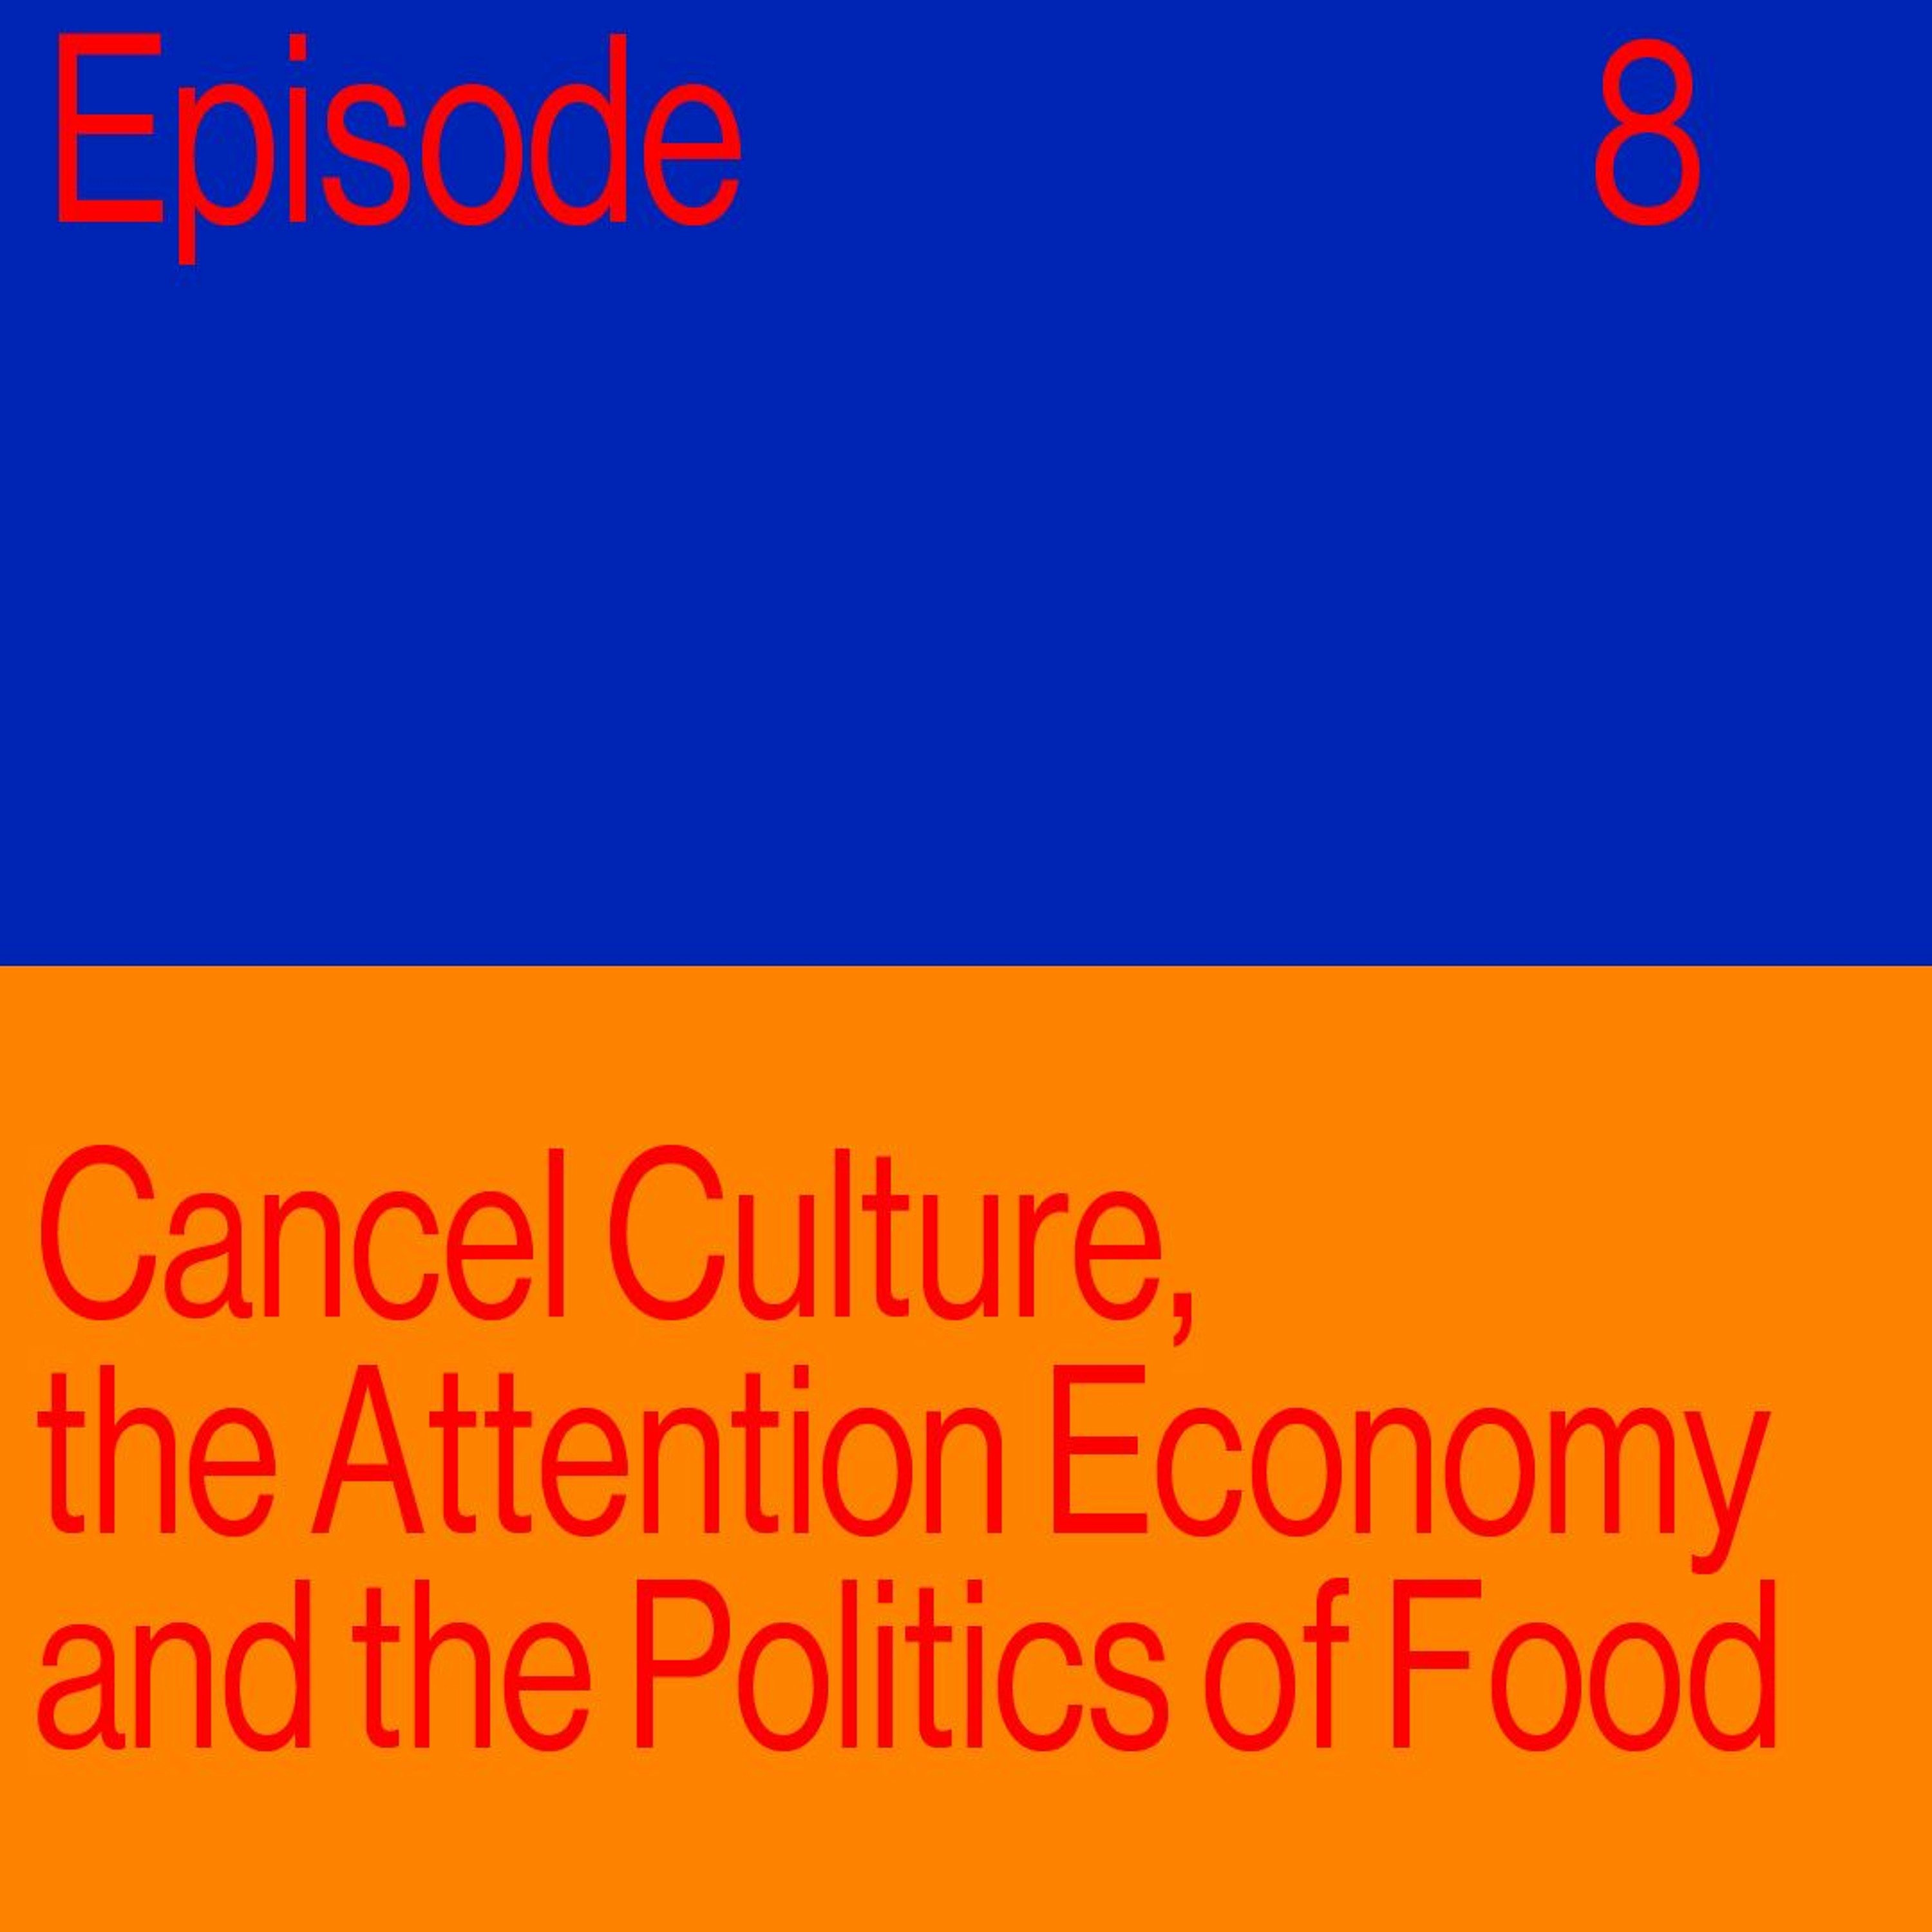 Episode 8: Cancel Culture, the Attention Economy, and the Politics of Food